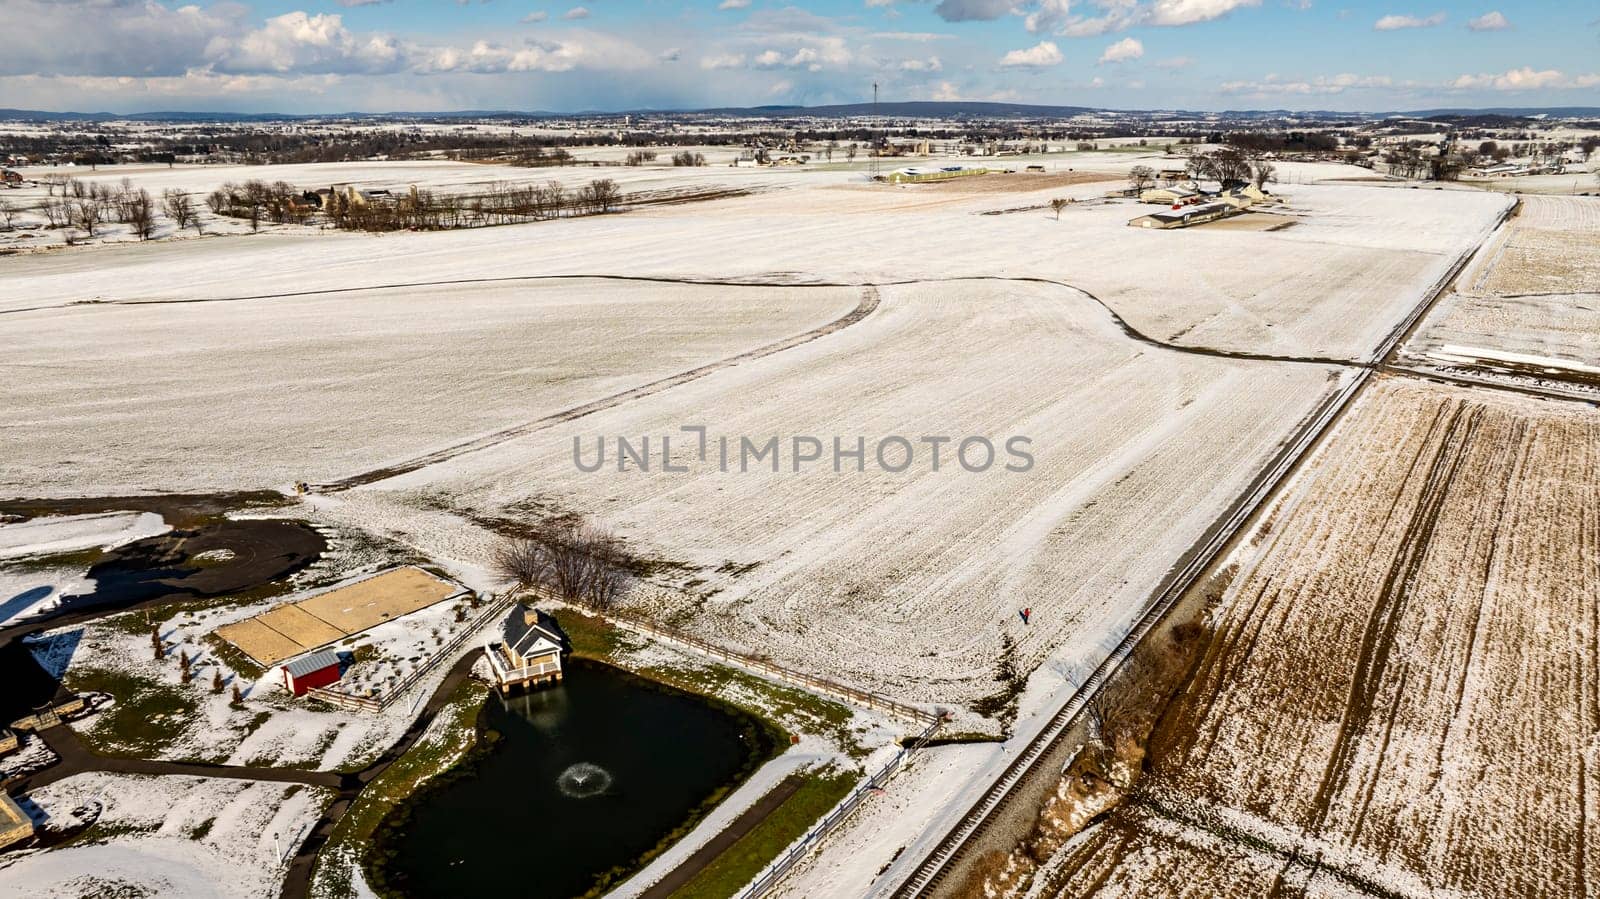 AnAerial View Of A Frosty Landscape Featuring A Pond, Railroad, And Snowy Fields.